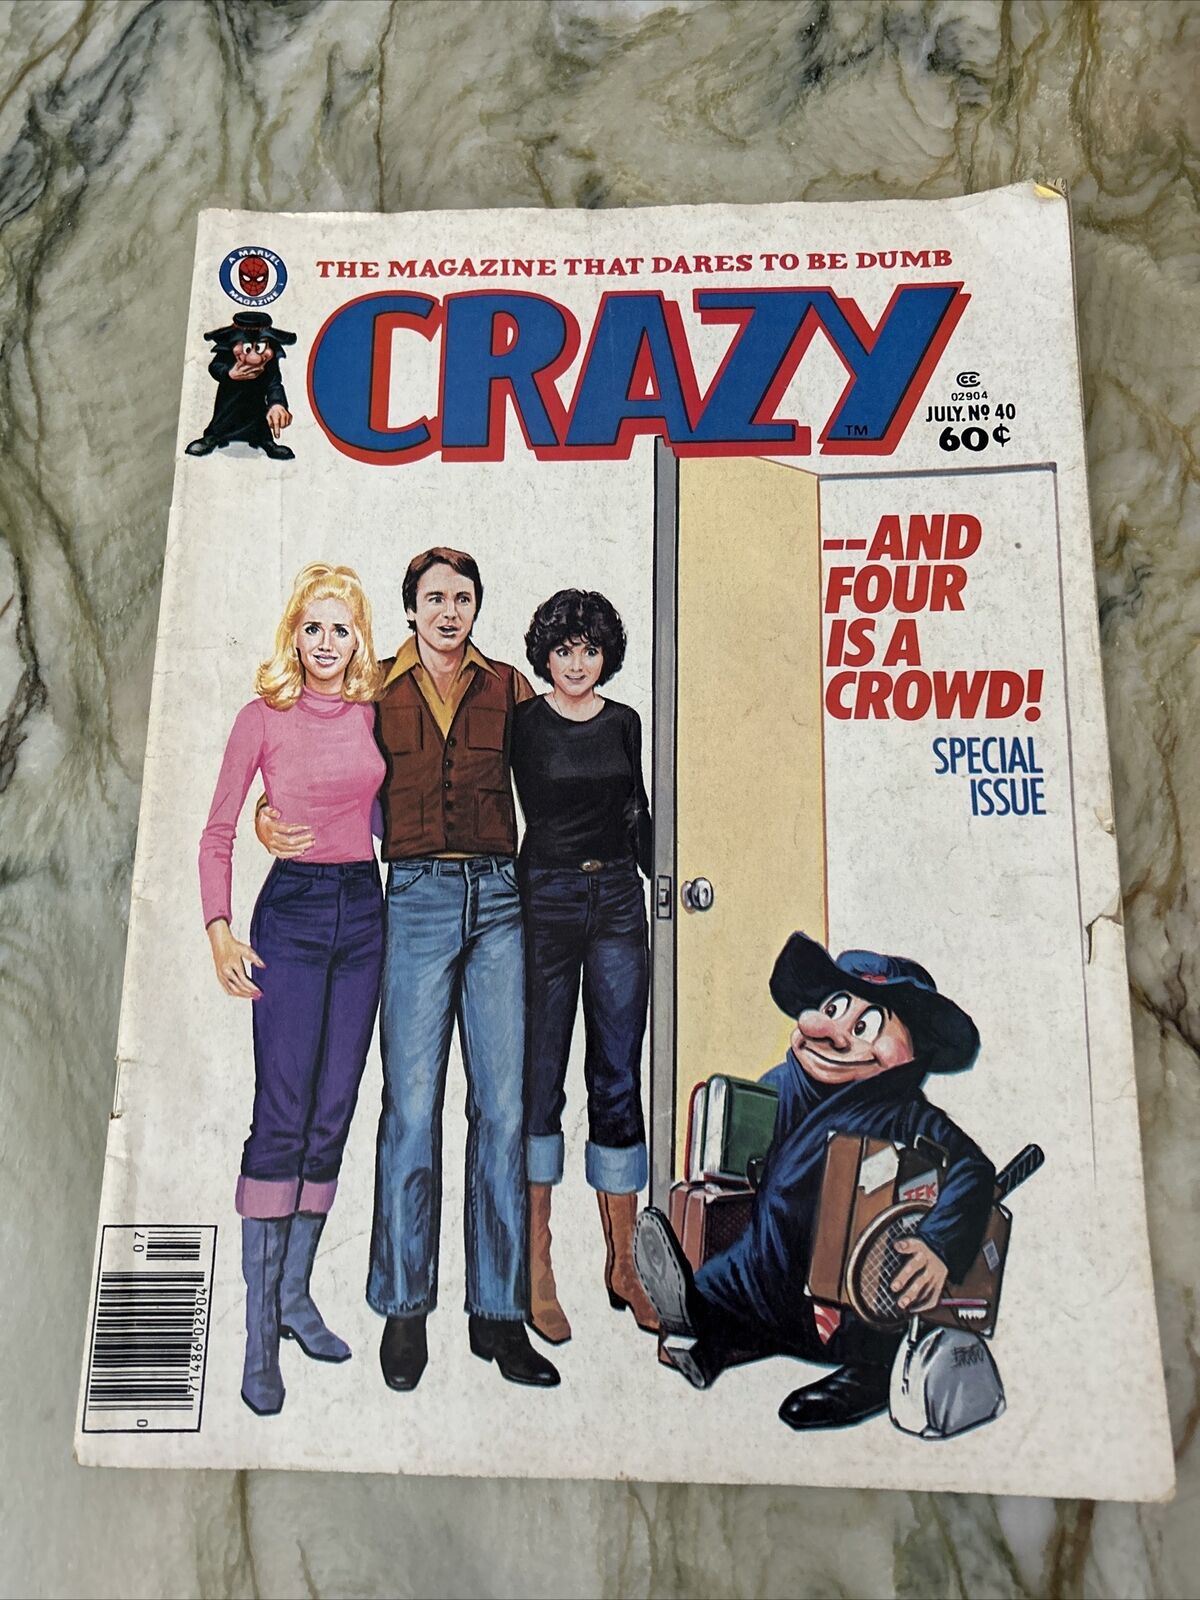 Crazy Magazine A Marvel Magazine Comic Book July No 40 And Four Is A Crowd 